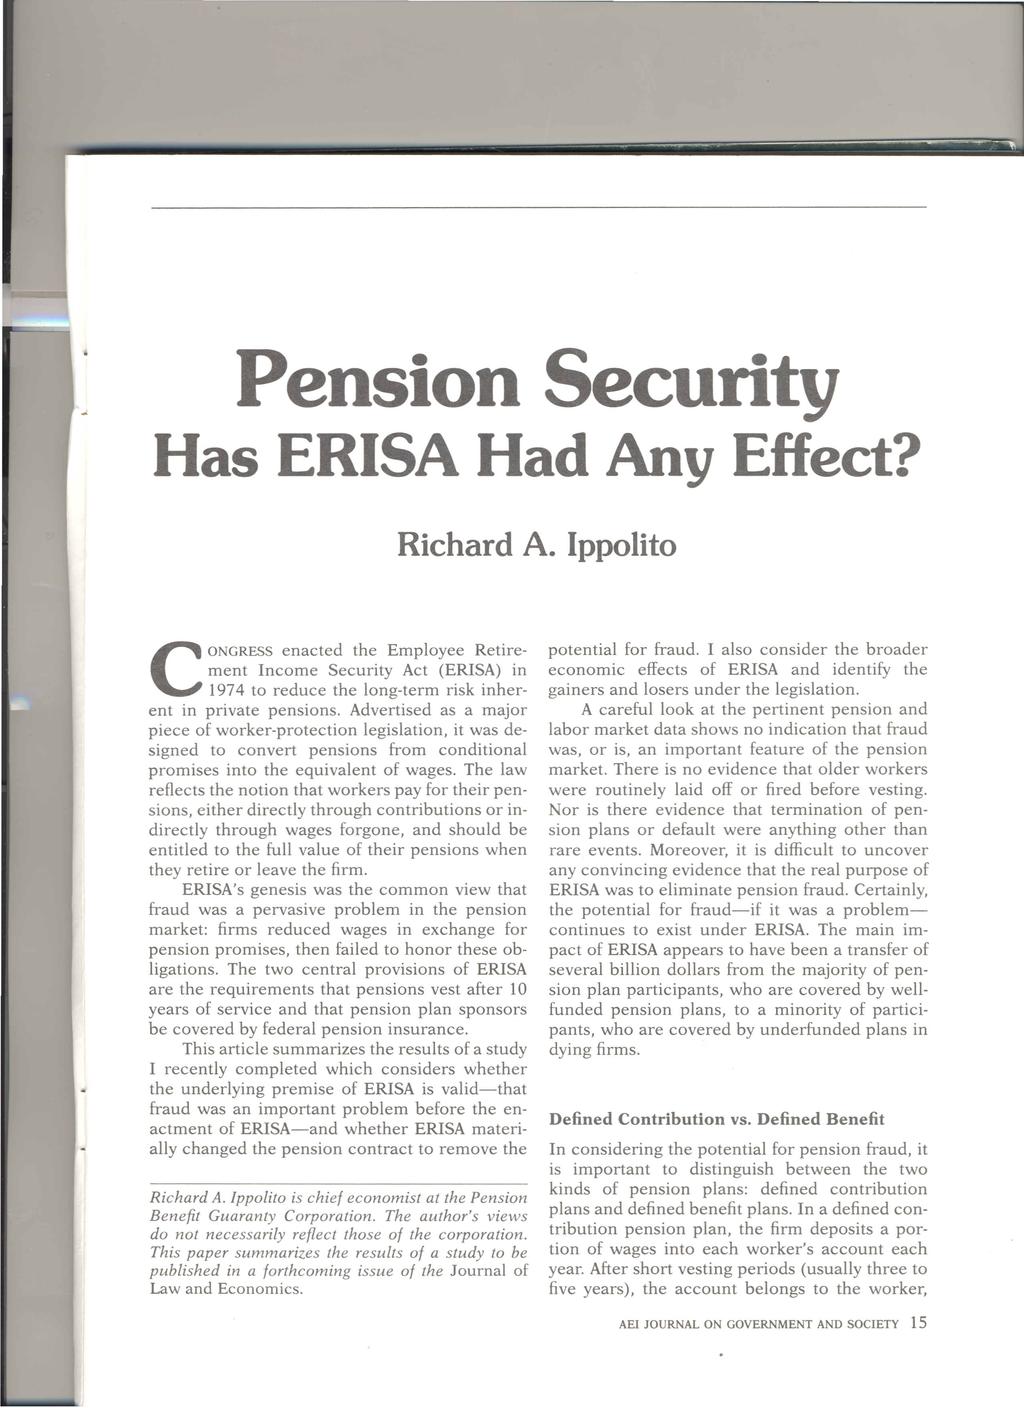 Pension Security Has ERISA Had Any Effect? Richard A. Ippolito CONGRESS enacted the Employee Retirement Income Security Act (ERISA) in 1974 to reduce the long-term risk inherent in private pensions.